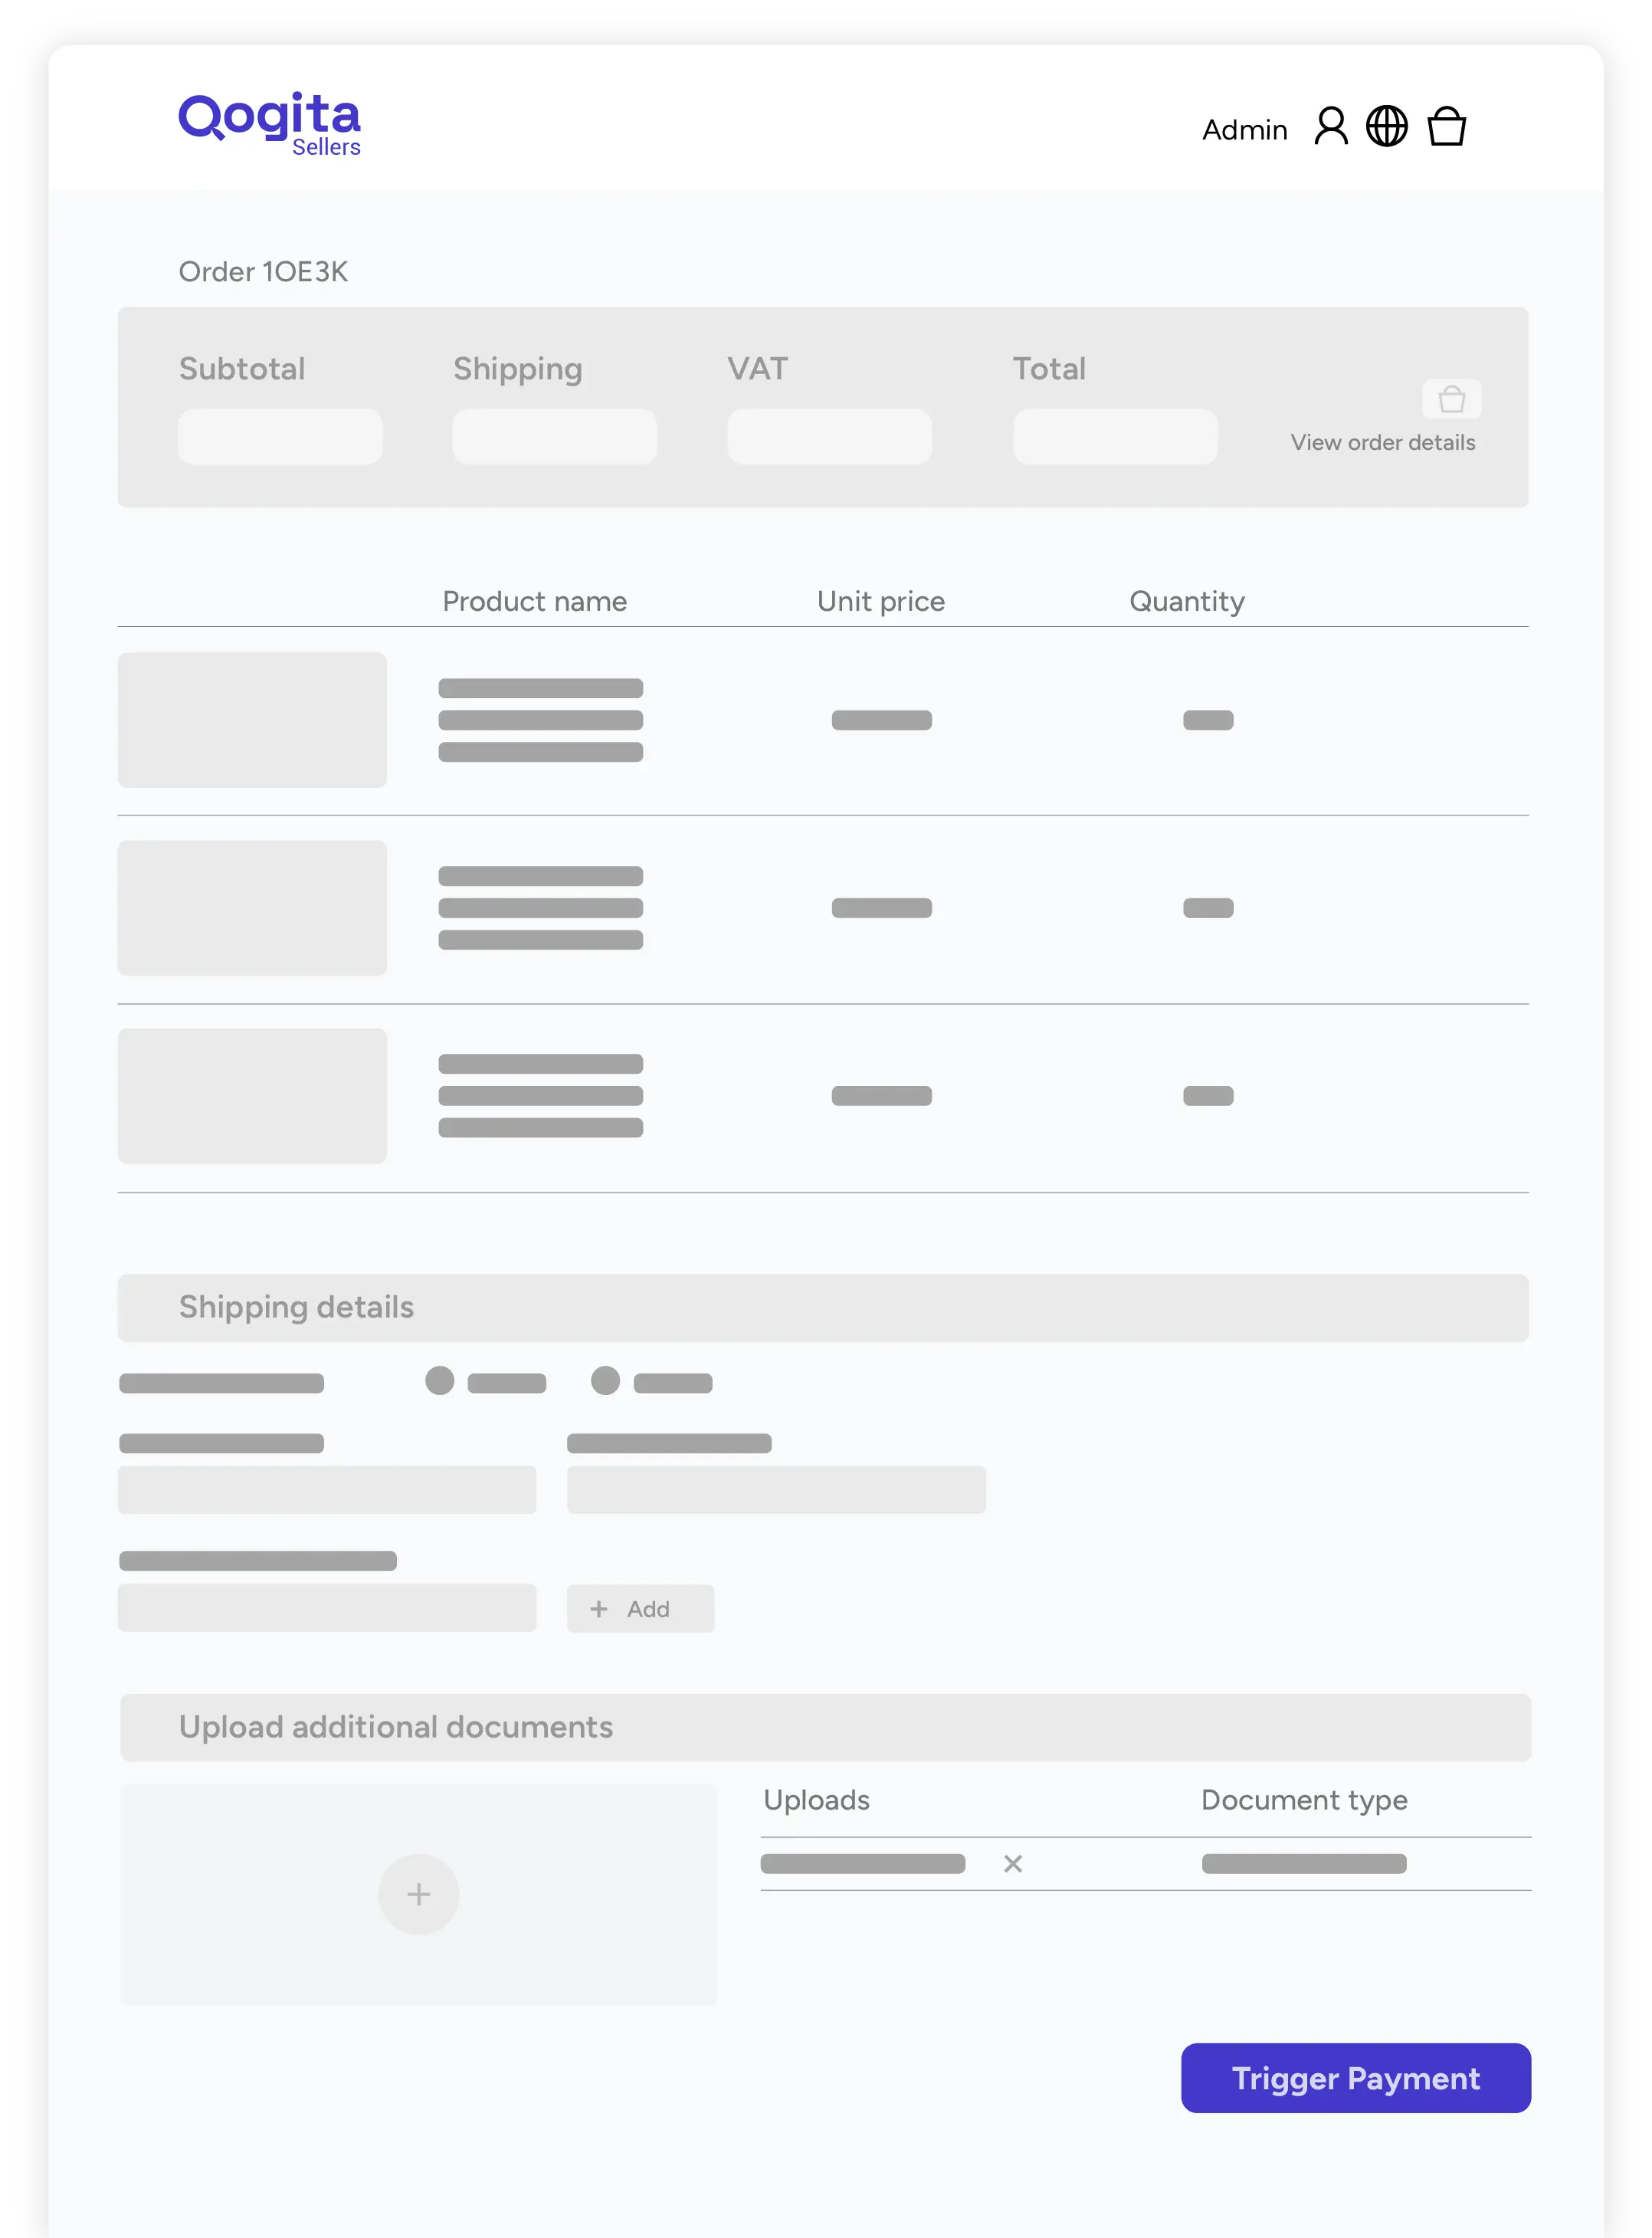 An image of the seller portal, highlighting the trigger payment button.